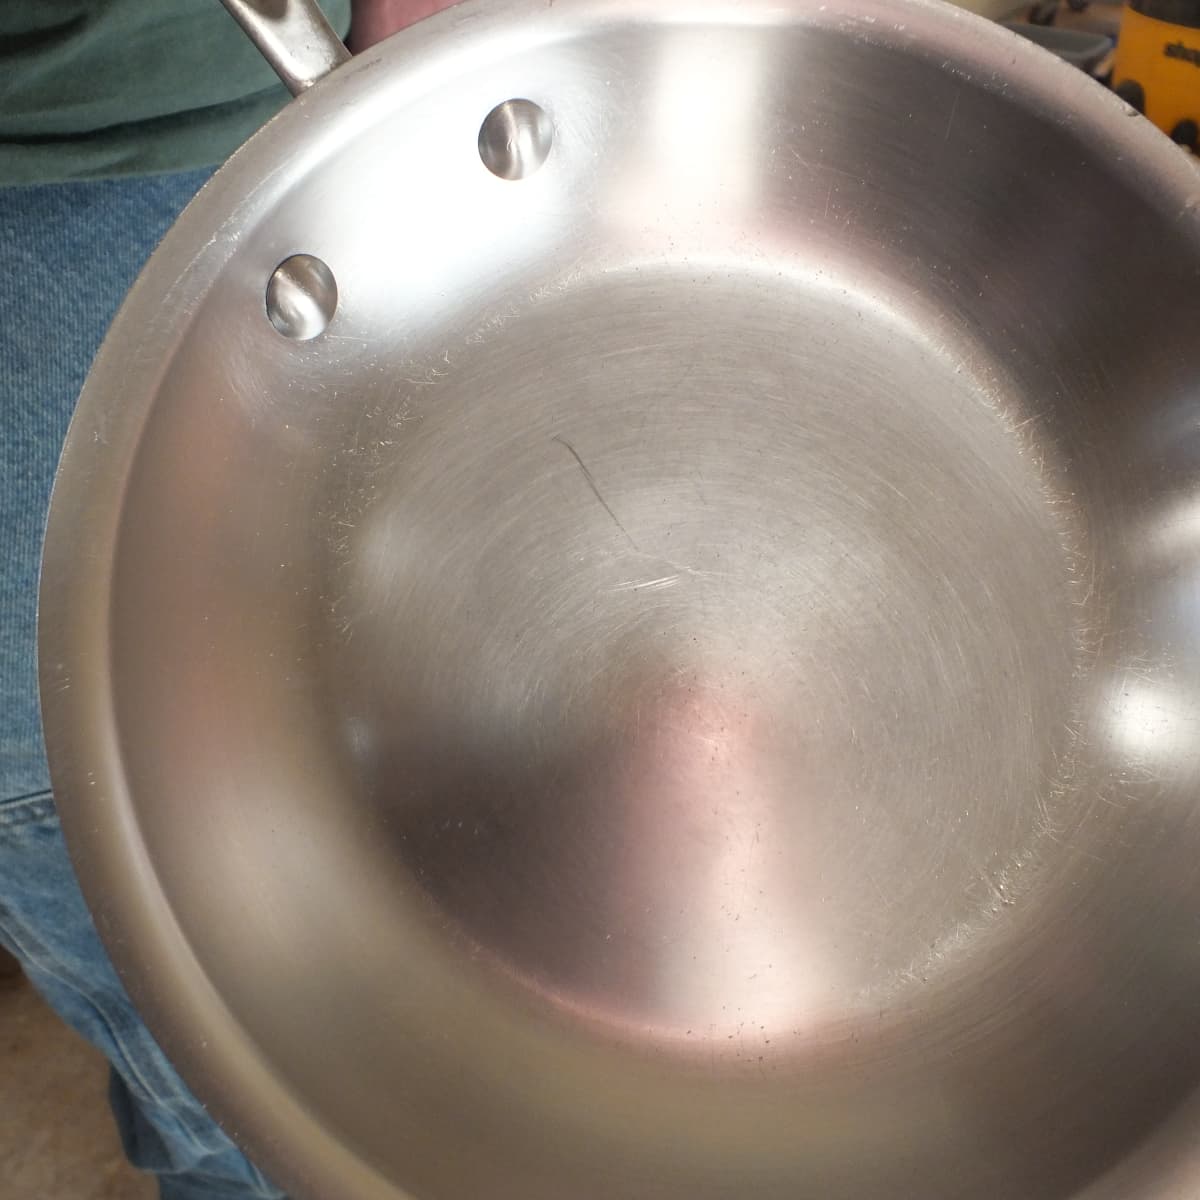 IS DISHWASHER SAFE FOR COOKWARE ? DO INDIAN VESSELS WORK IN A